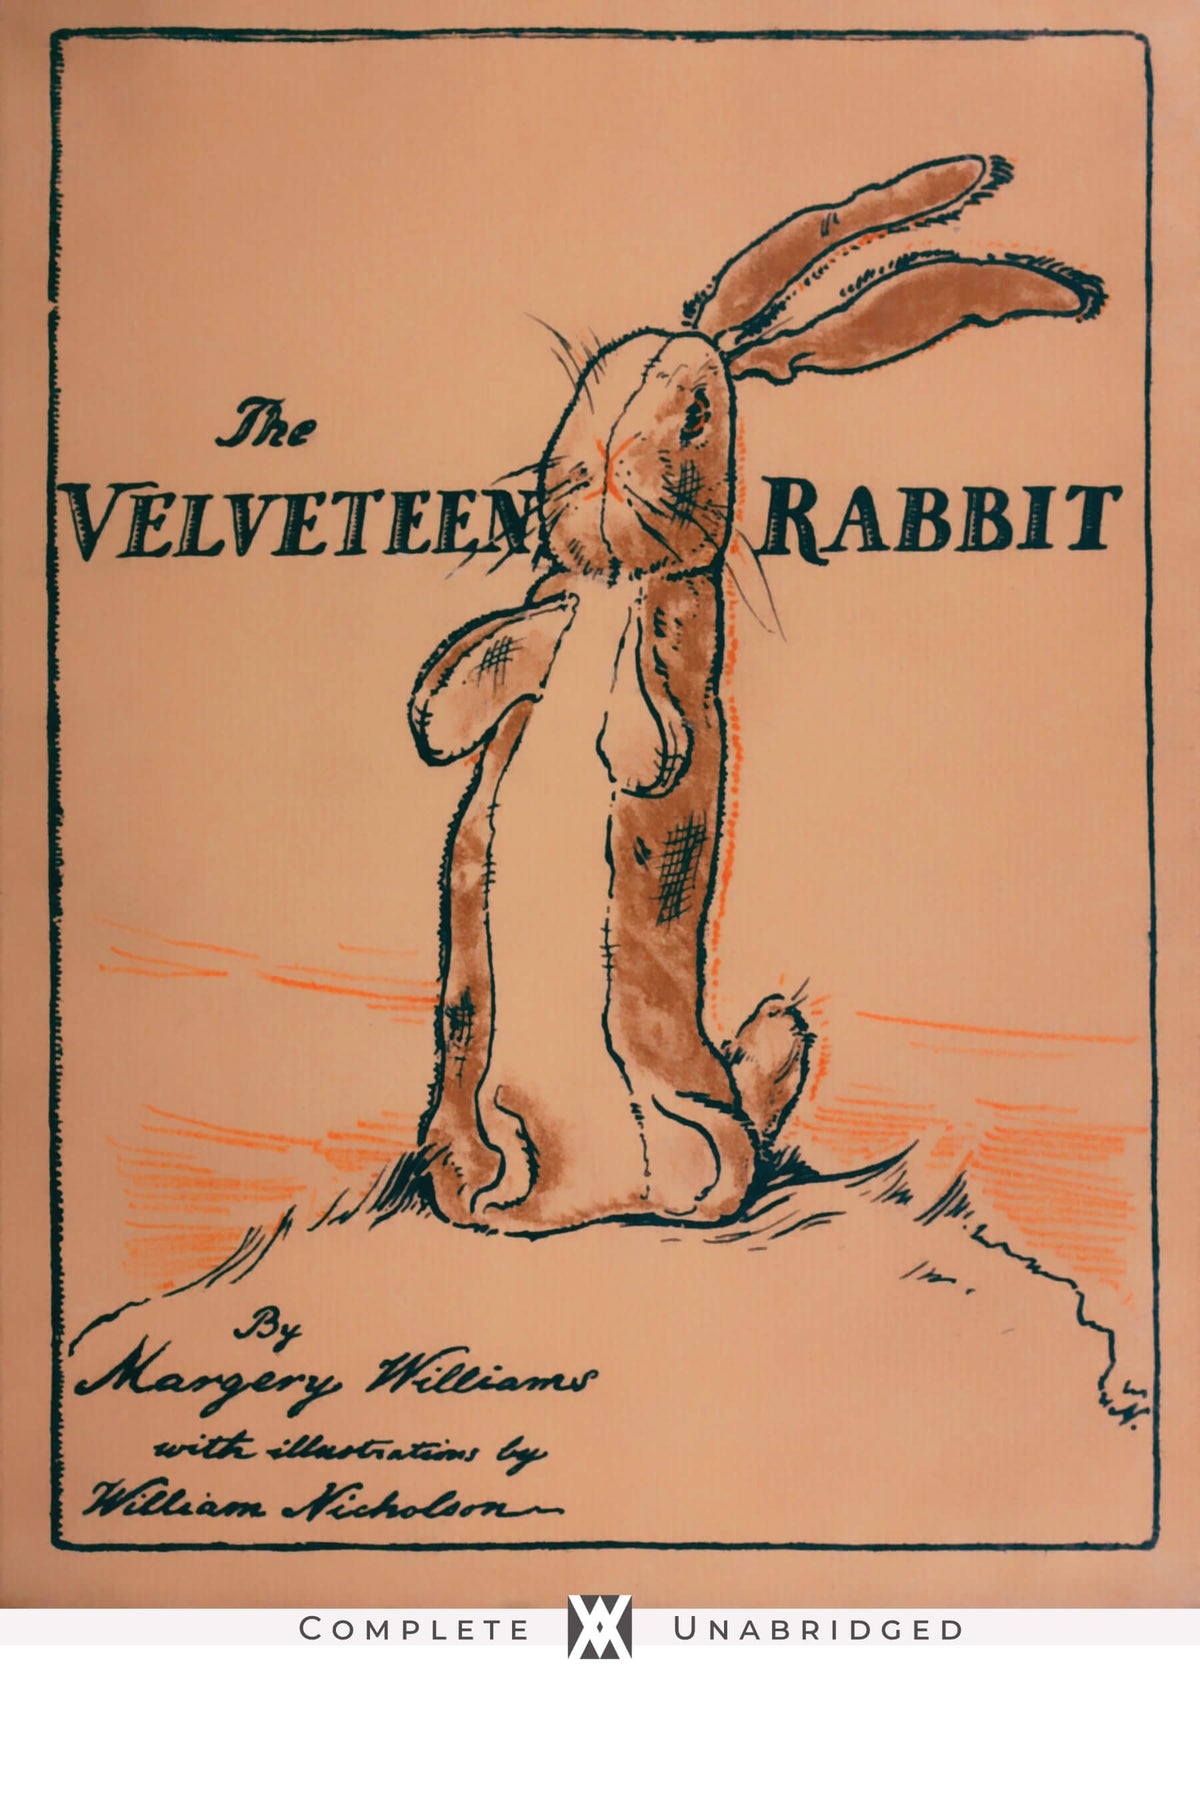 The Velveteen Rabbit - Margery Williams — New West Press